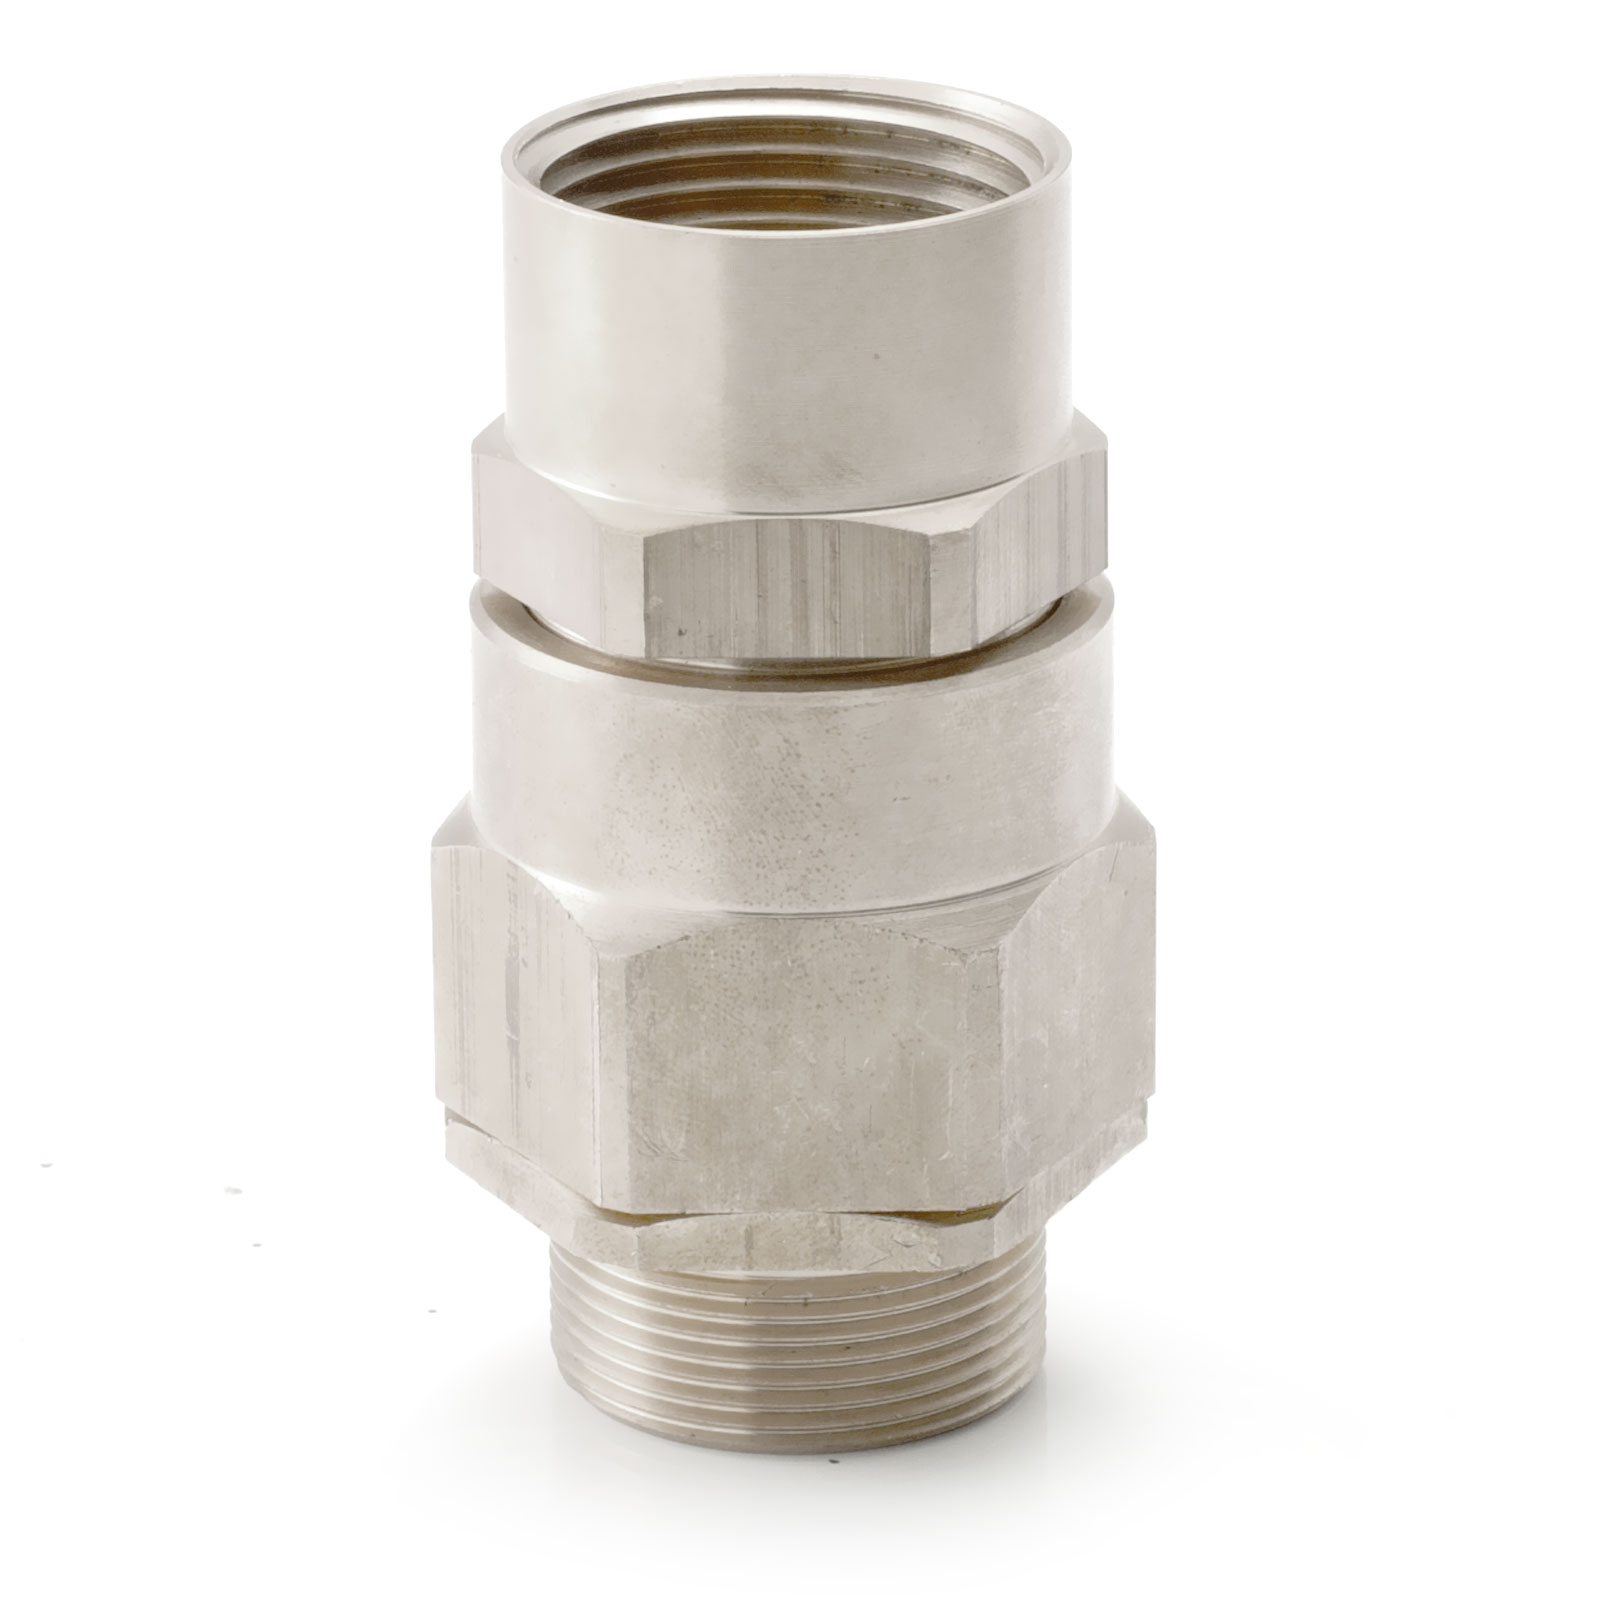 Explosion-proof universal cable glands KOVTVL for armored and non-armored cable in hoses, pipe conduits, metal hoses, as well as open wiring or cable laid in cable tray; inner thread for external connection